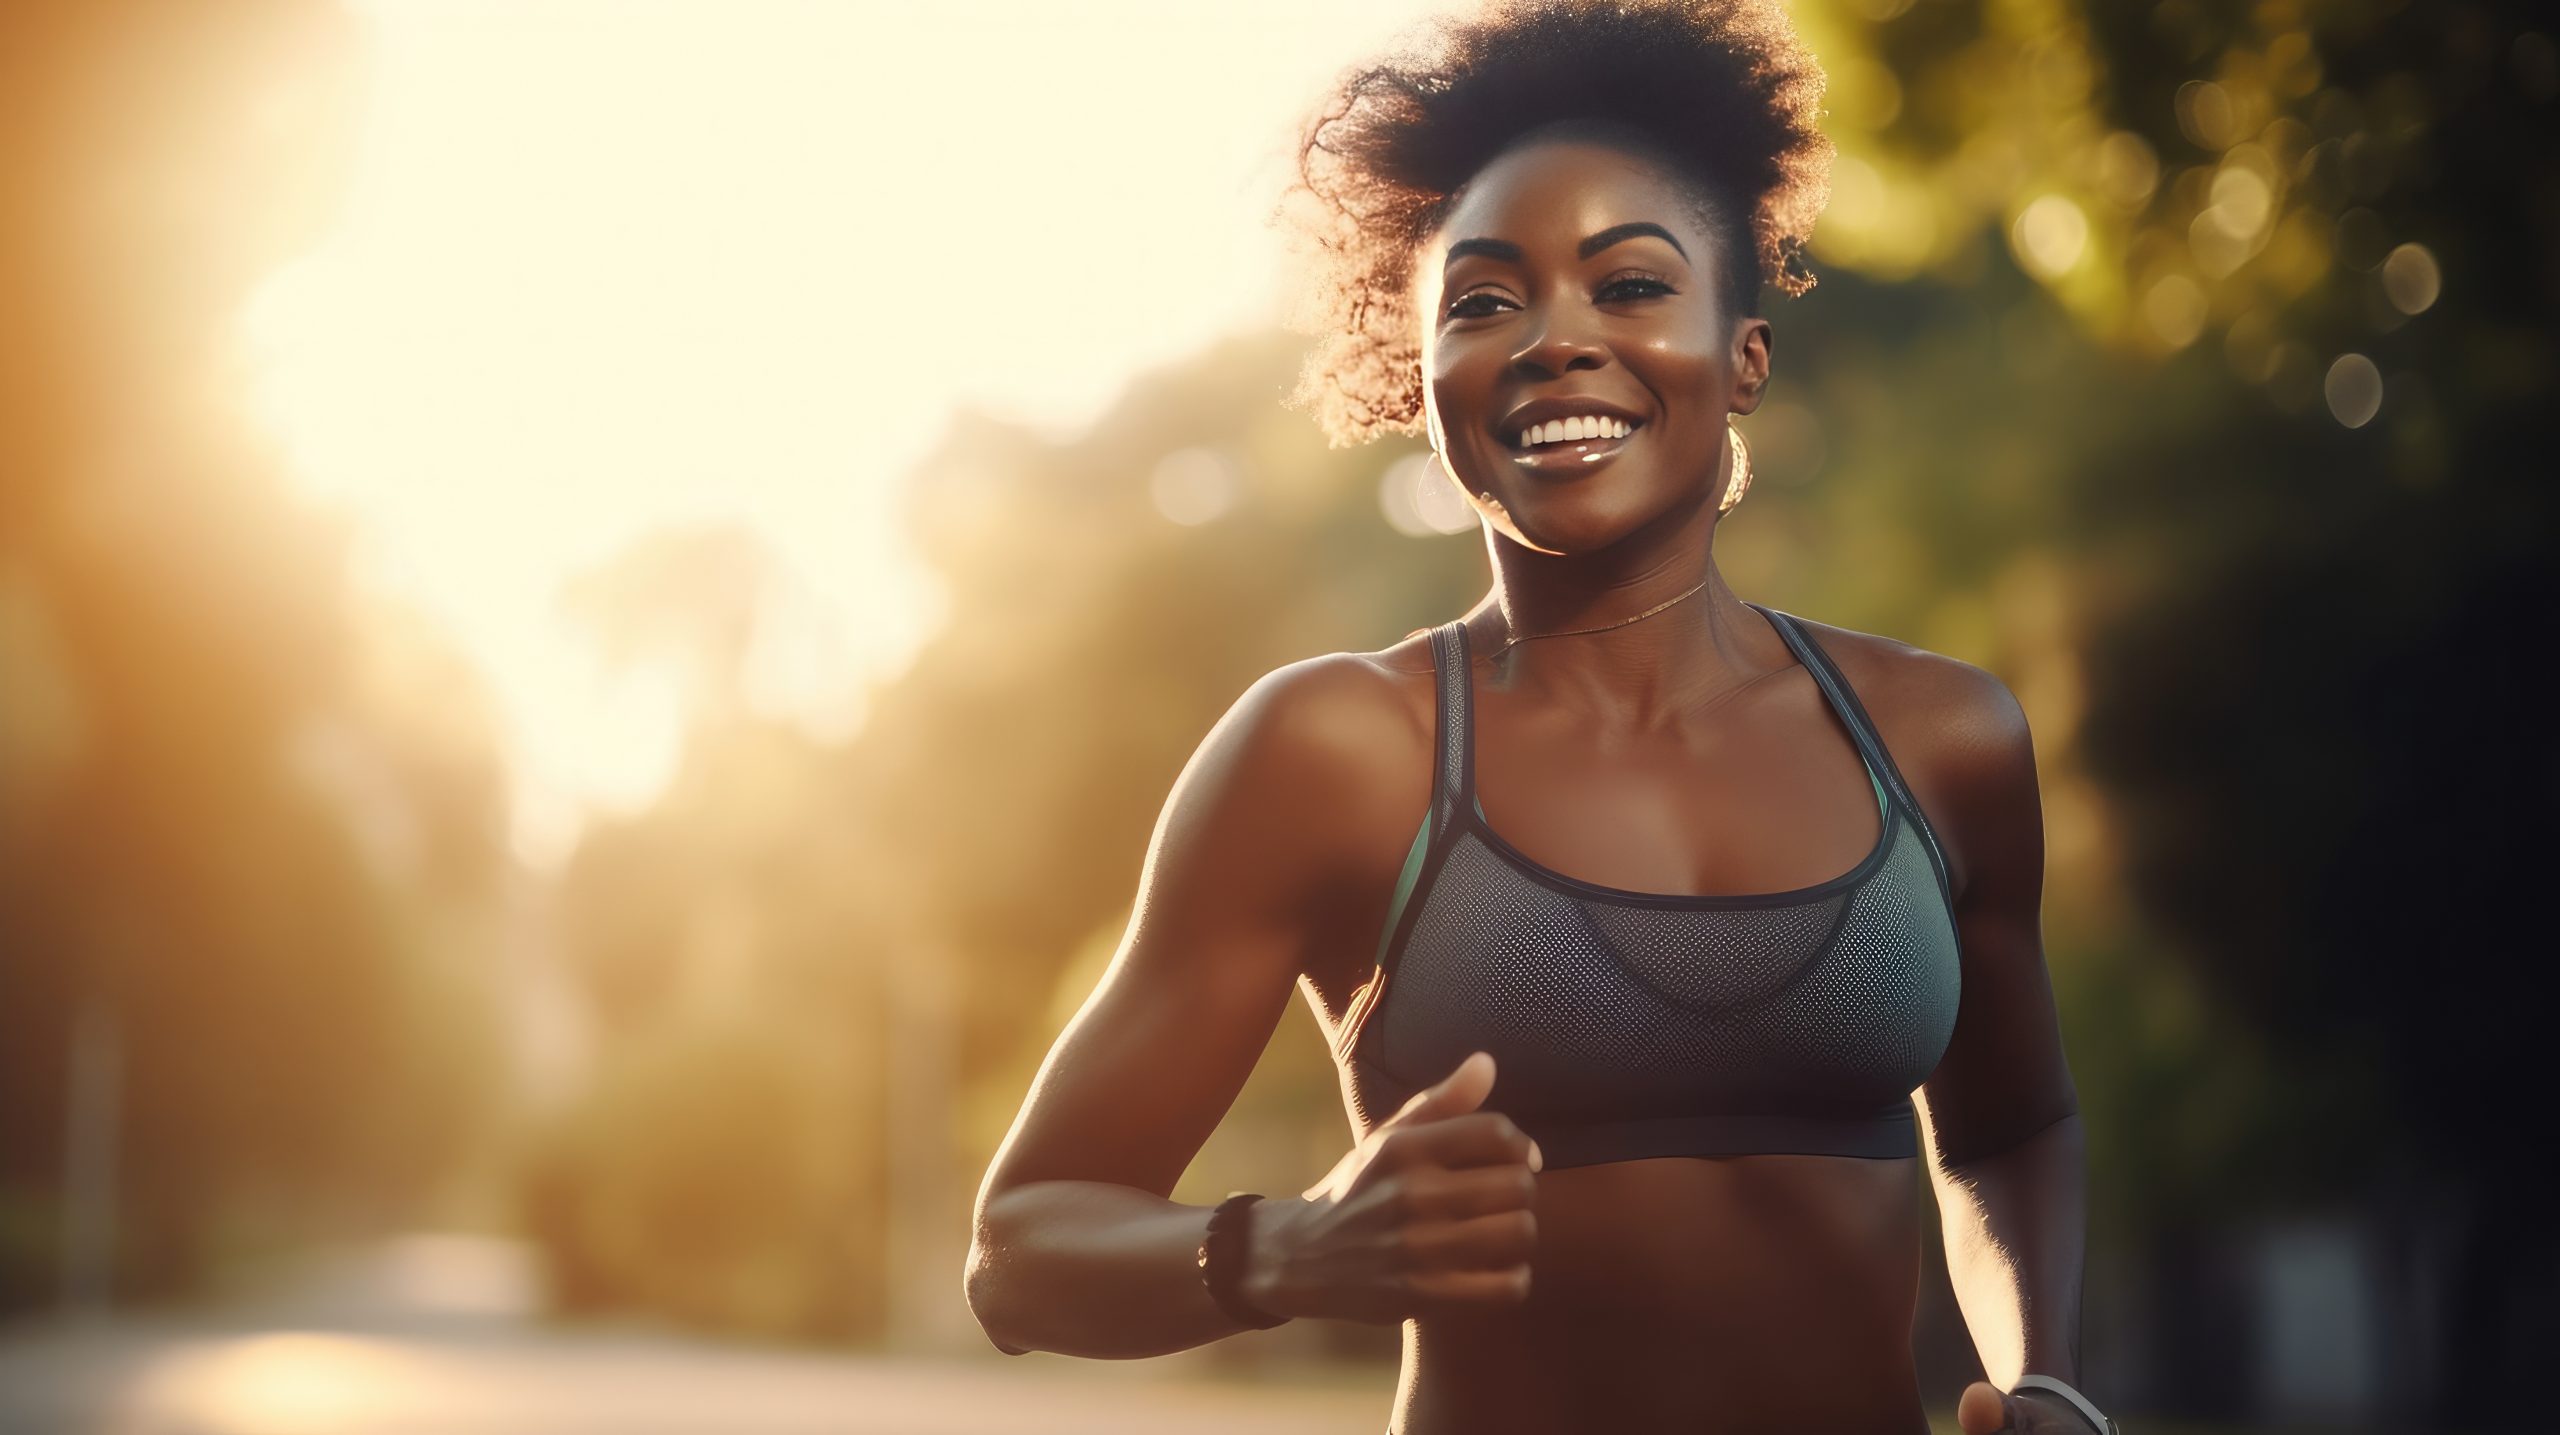 black woman jogging in a sports bra during the morning